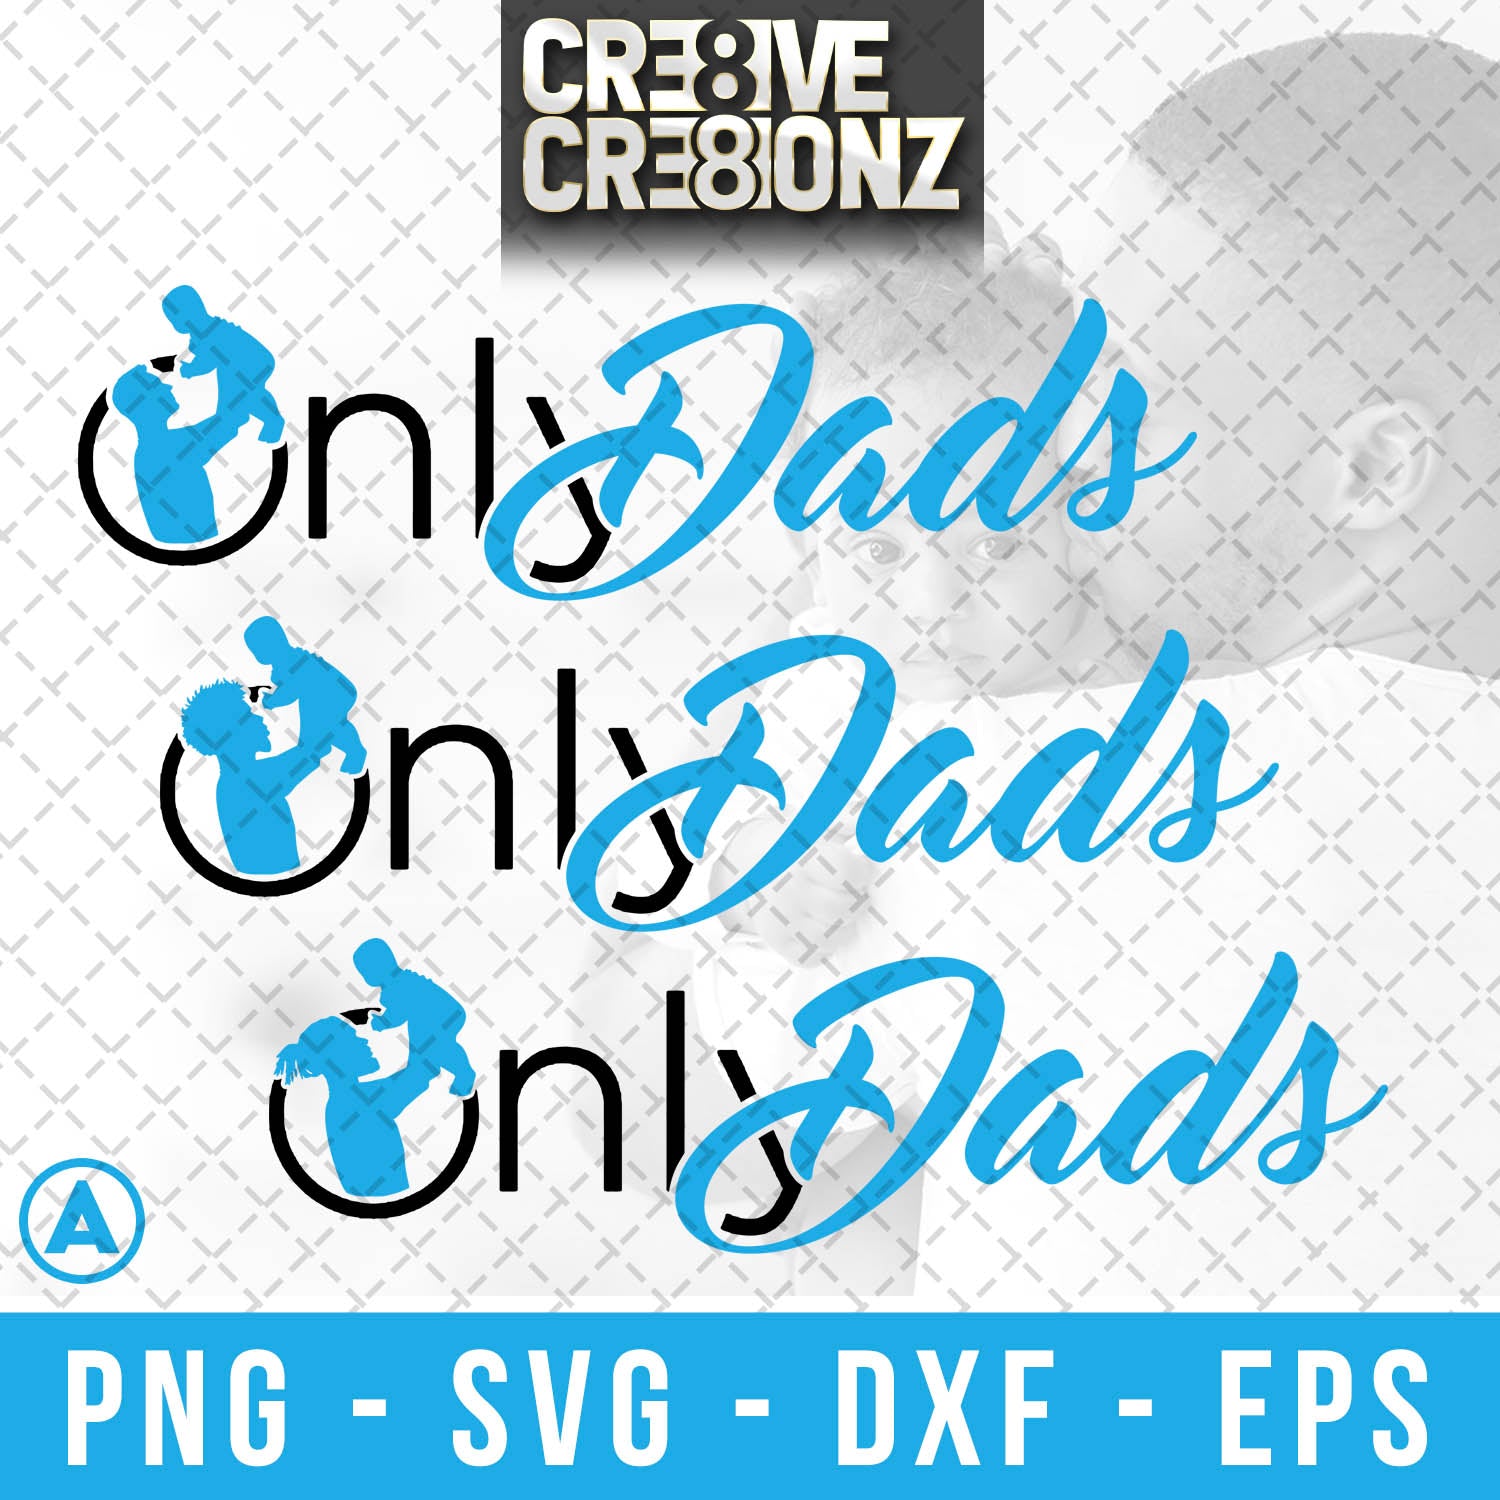 Only Dads SVG - Cre8ive Cre8ionz